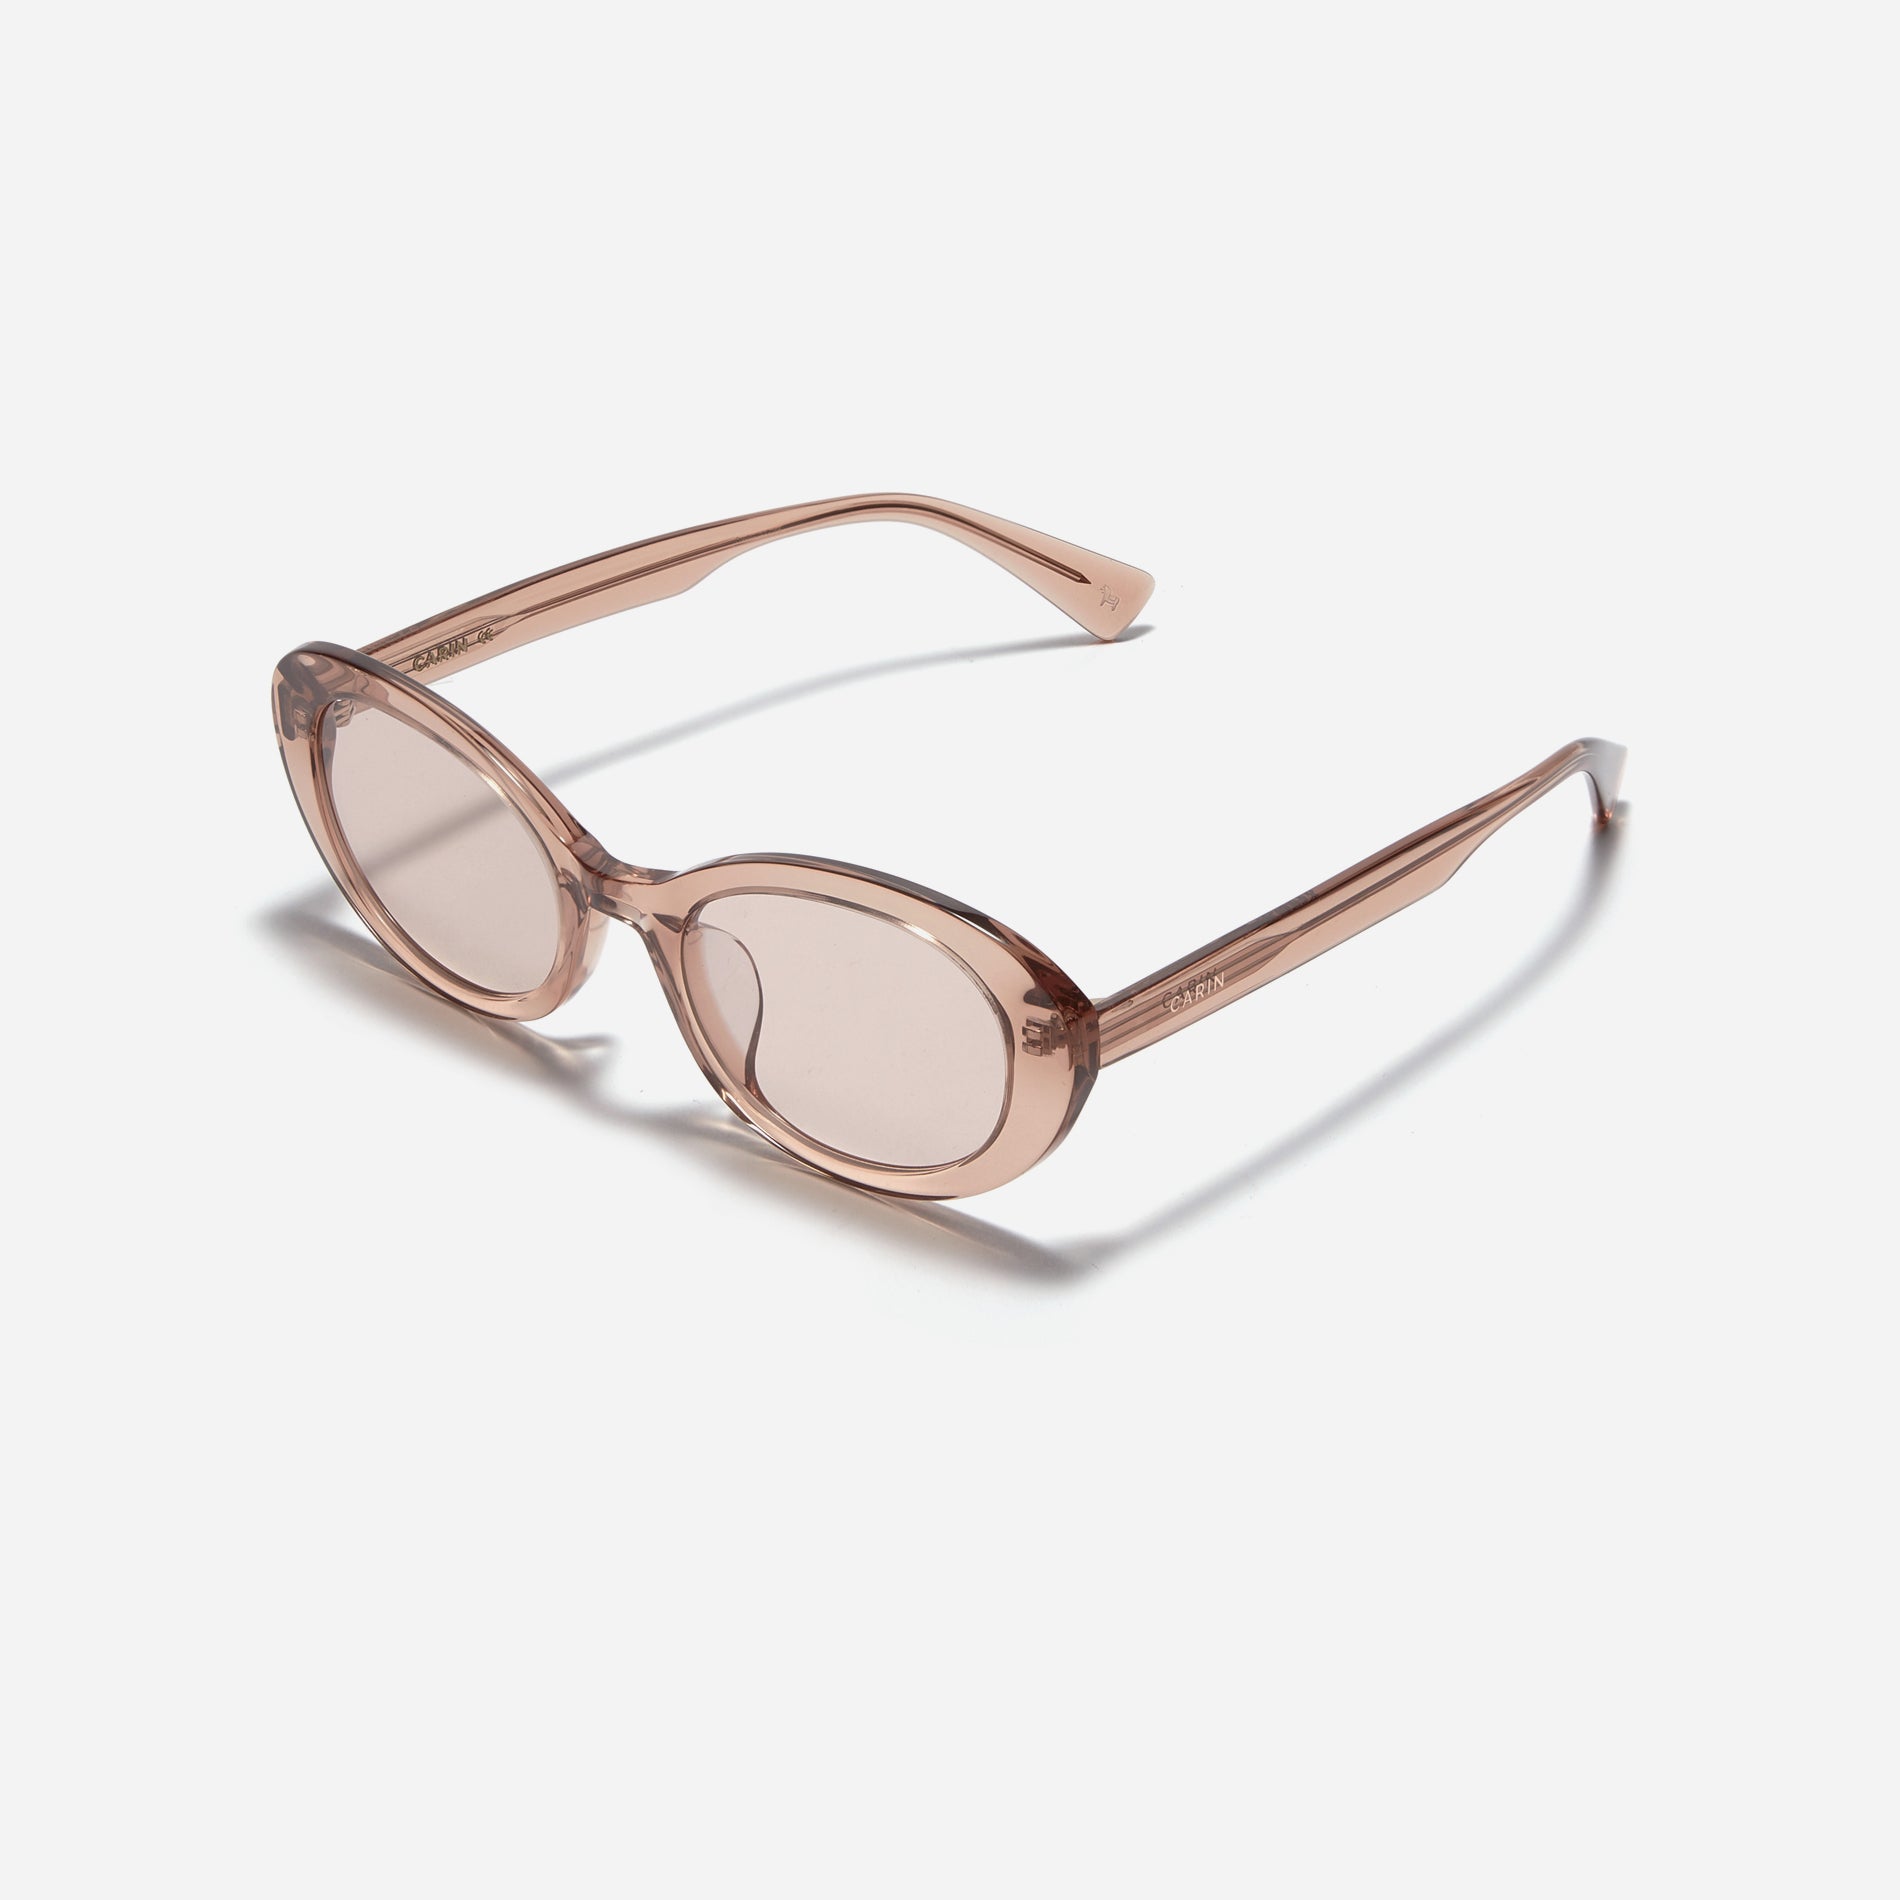 Round-shaped petite frame sunglasses with retro-inspired design that exudes chic and contemporary vibe. 